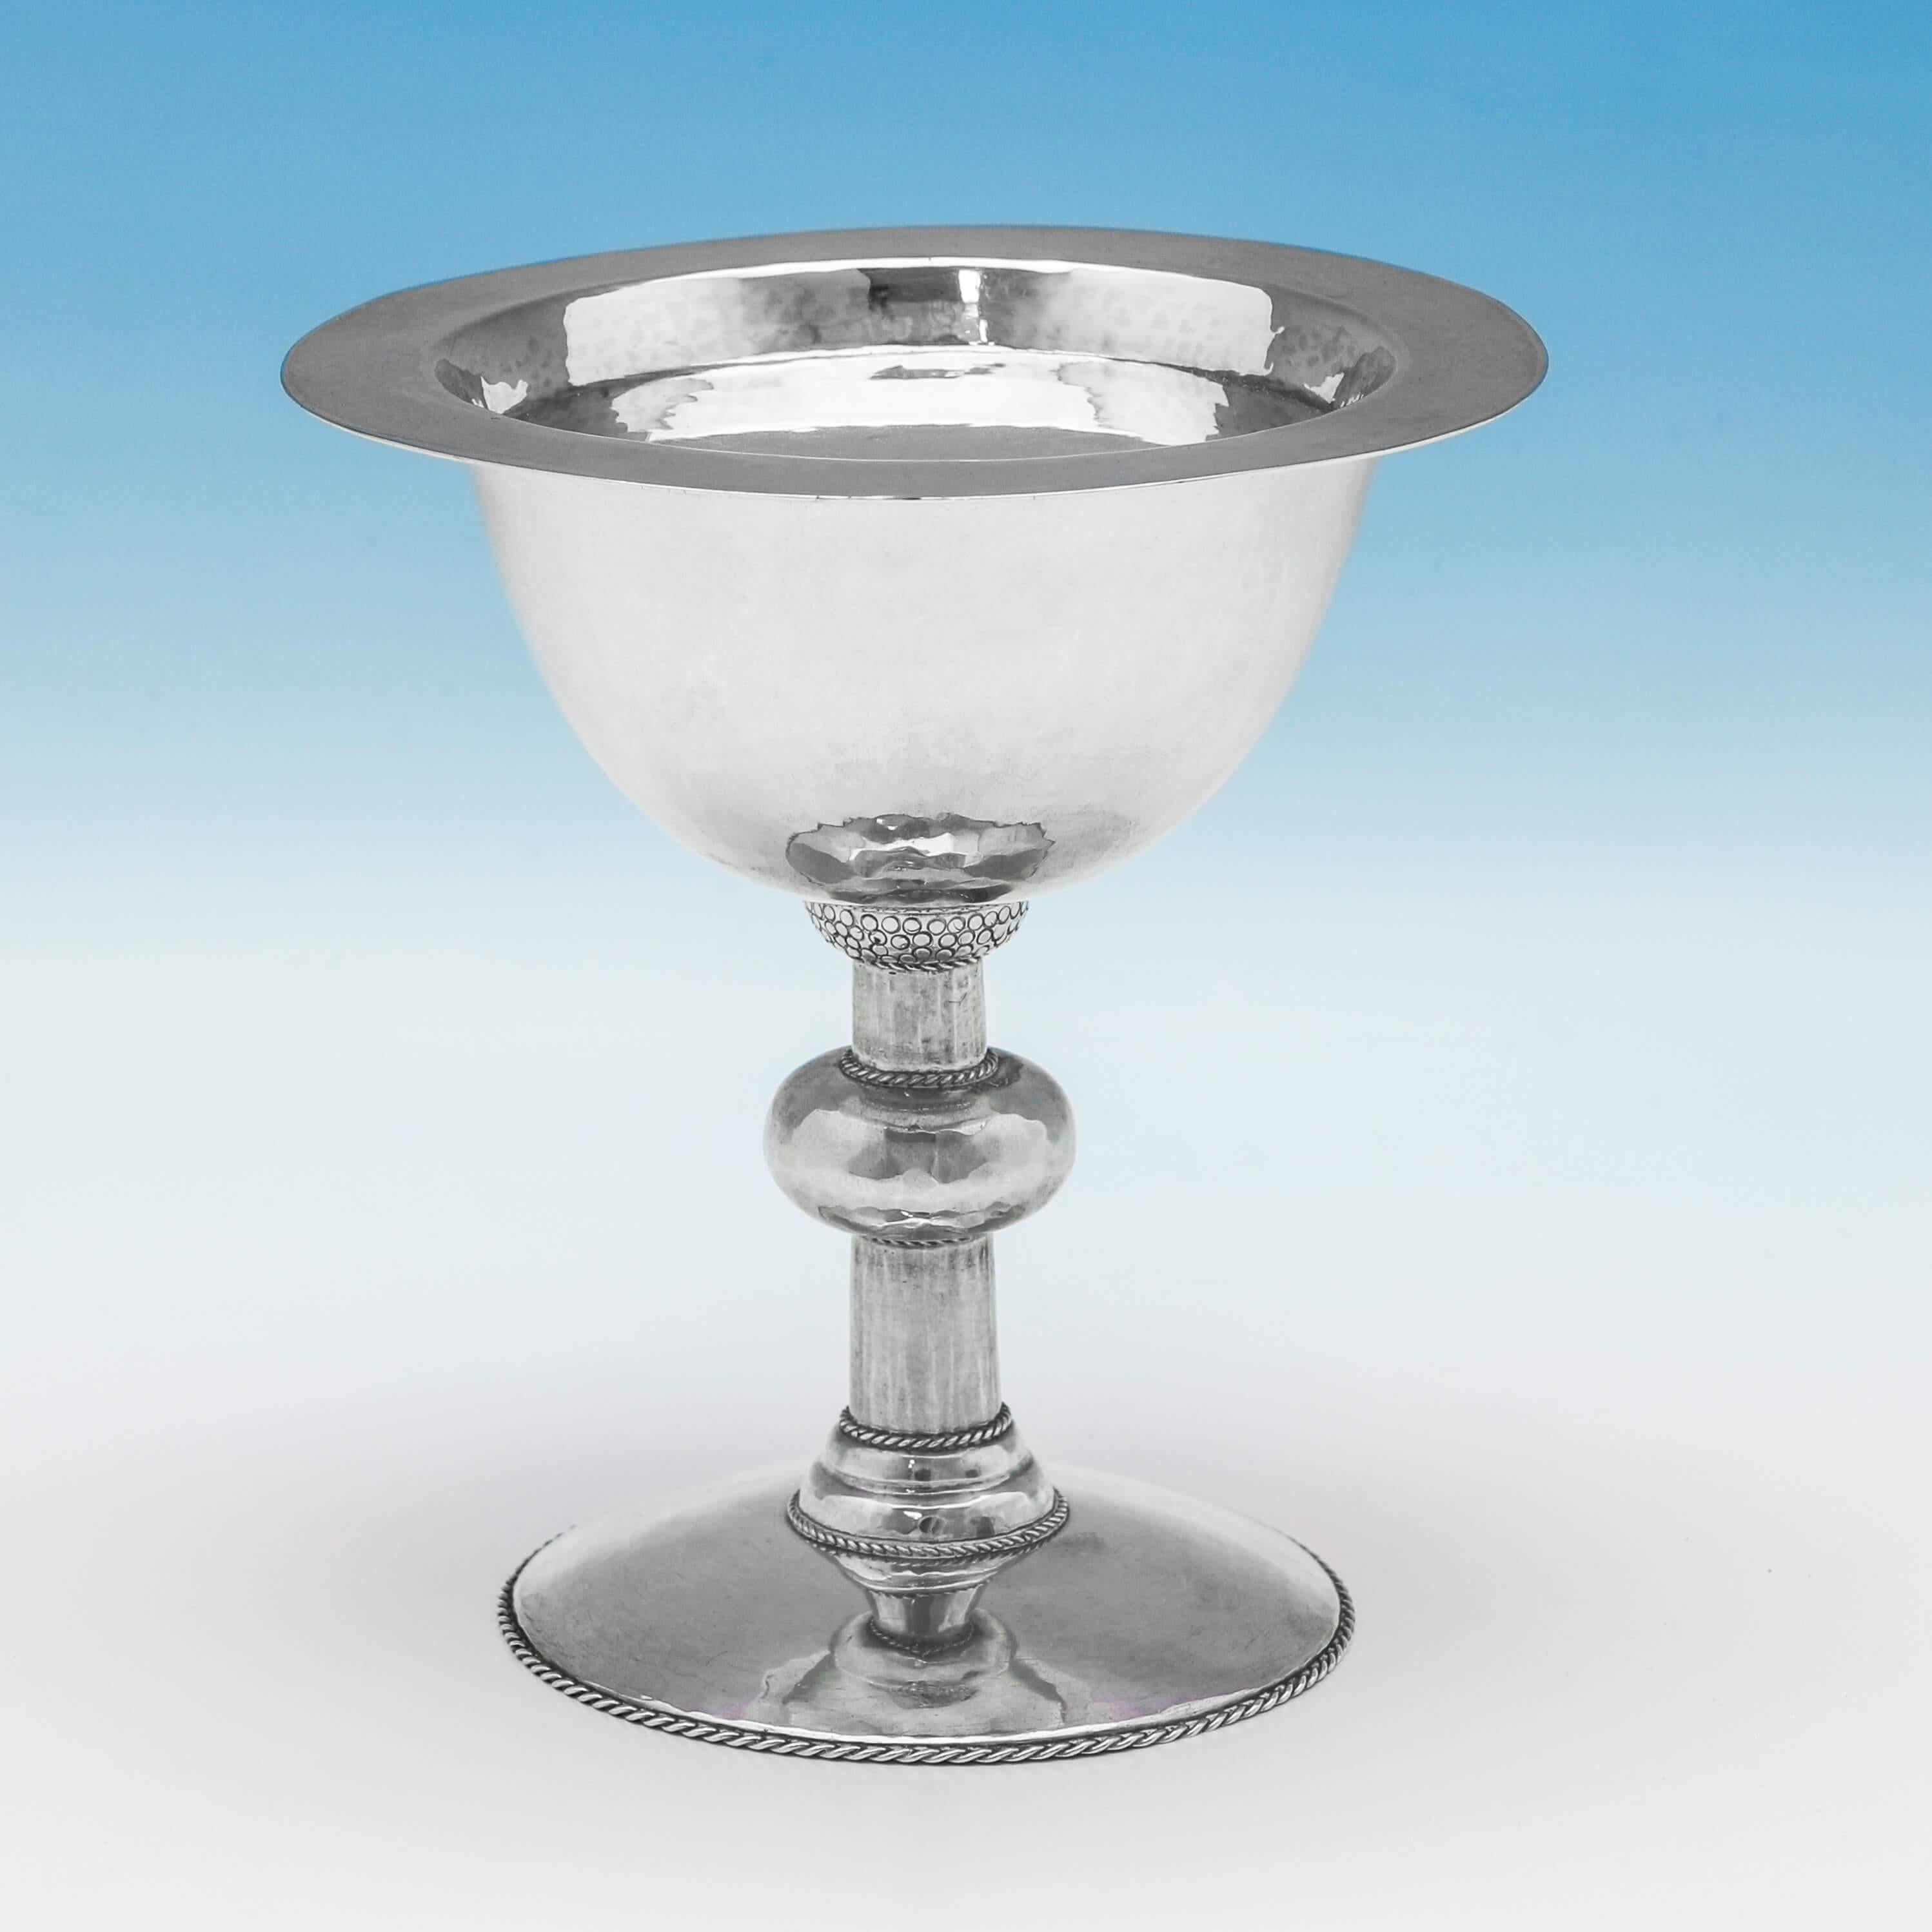 Hallmarked in London in 1924 by Artificers Guild, this beautifully crafted, hand-hammered, sterling silver chalice and paten, features fine twist rope borders on the chalice, while the paten is plain in design. The set is presented in its original,